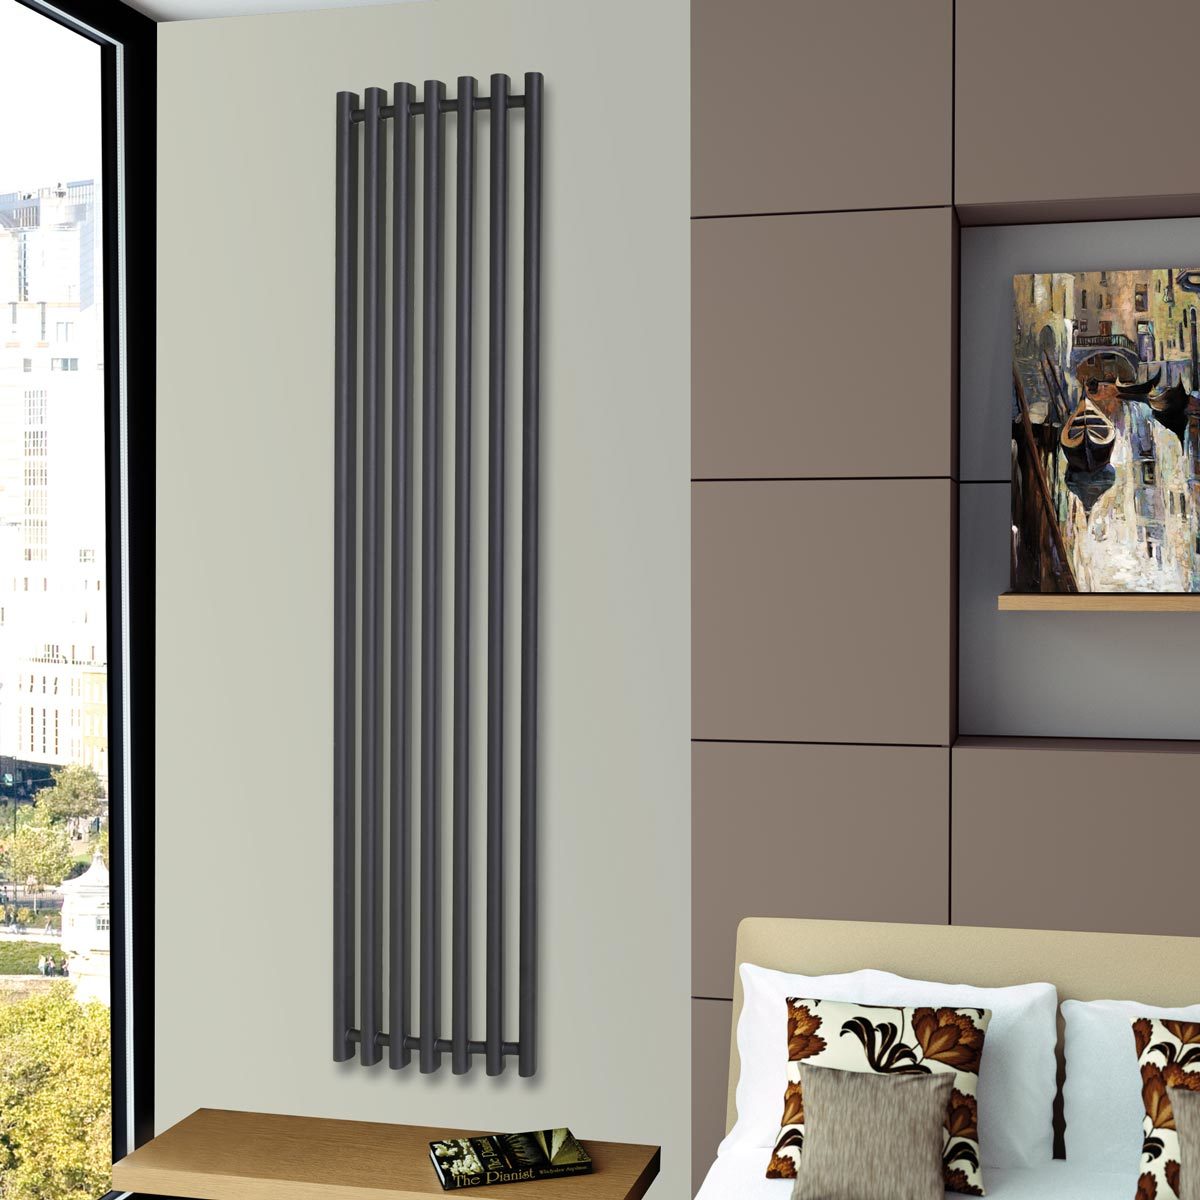 Lifestyle image of radiator in bedroom setting next to window